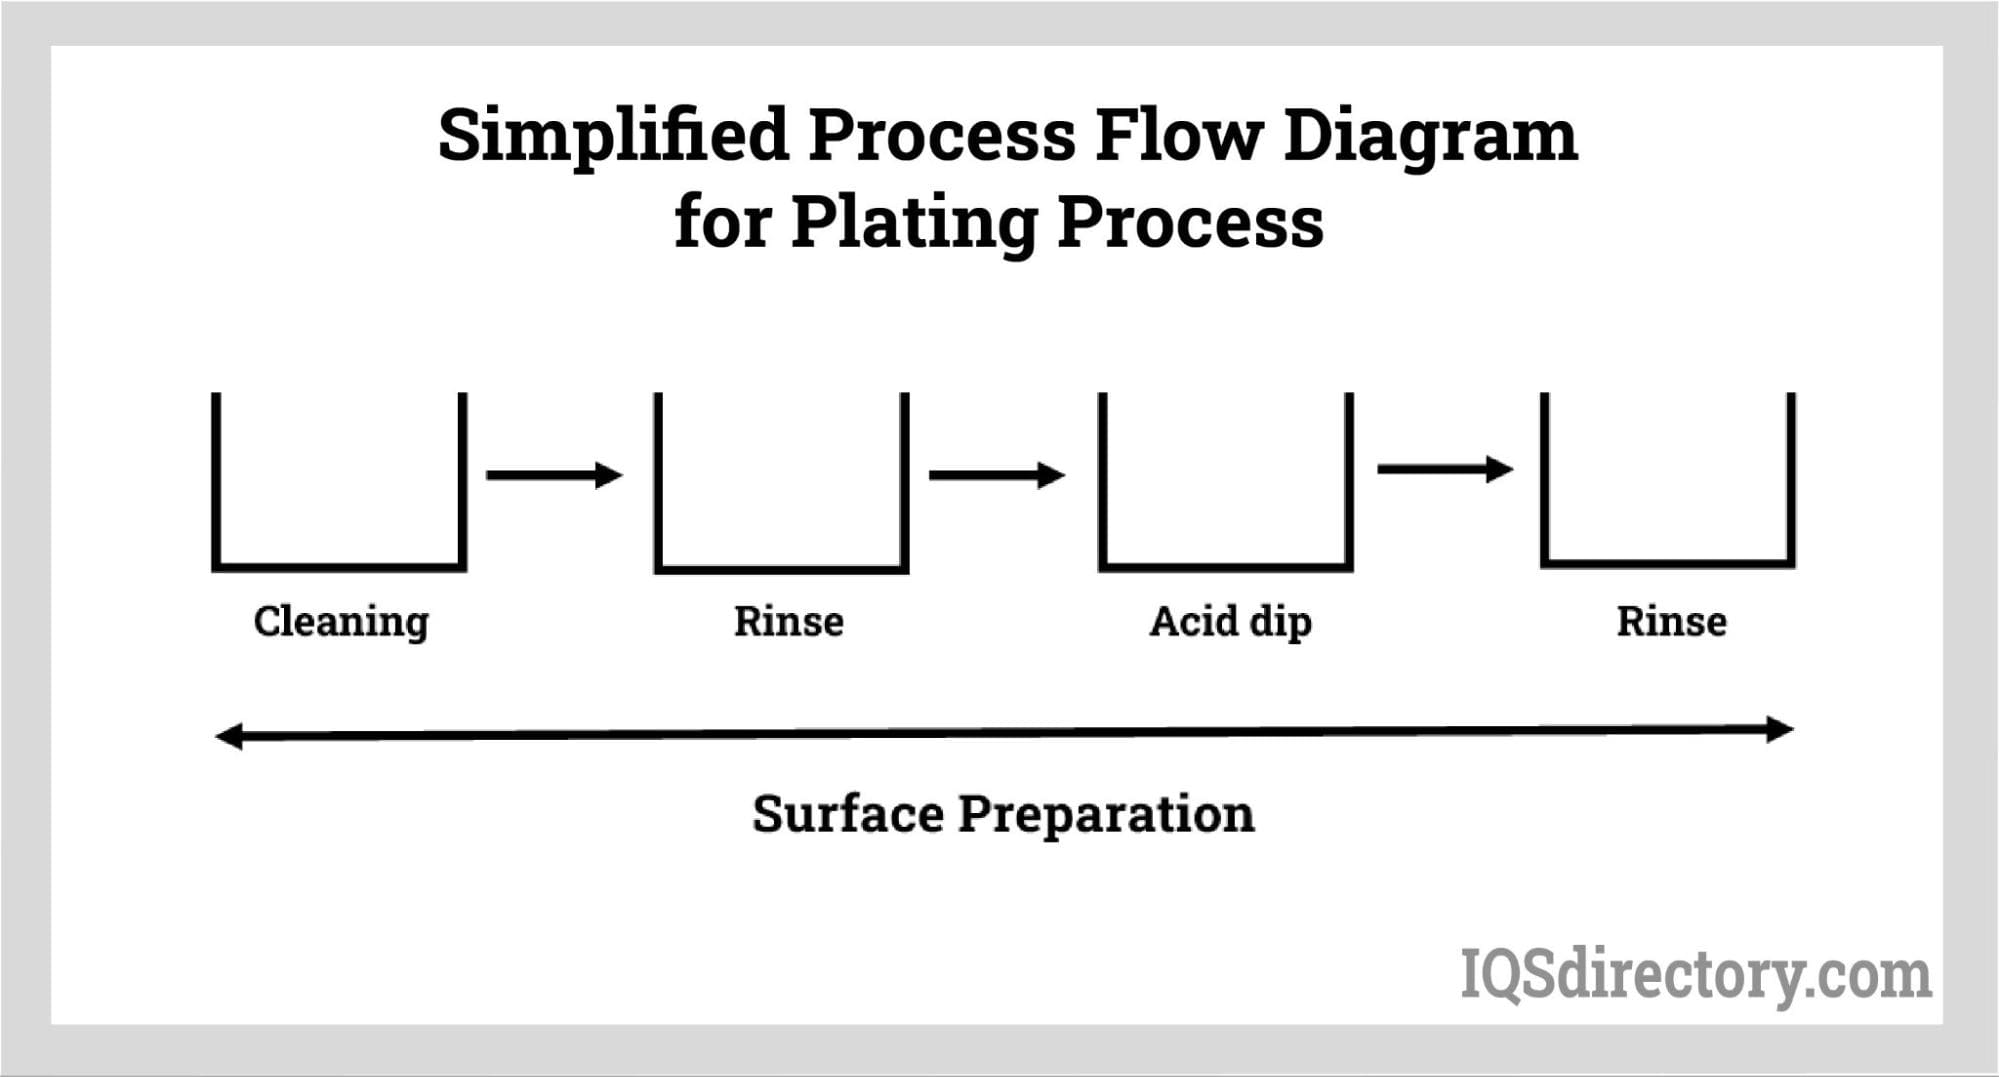 Simplified Process Flow Diagram for Plating Process